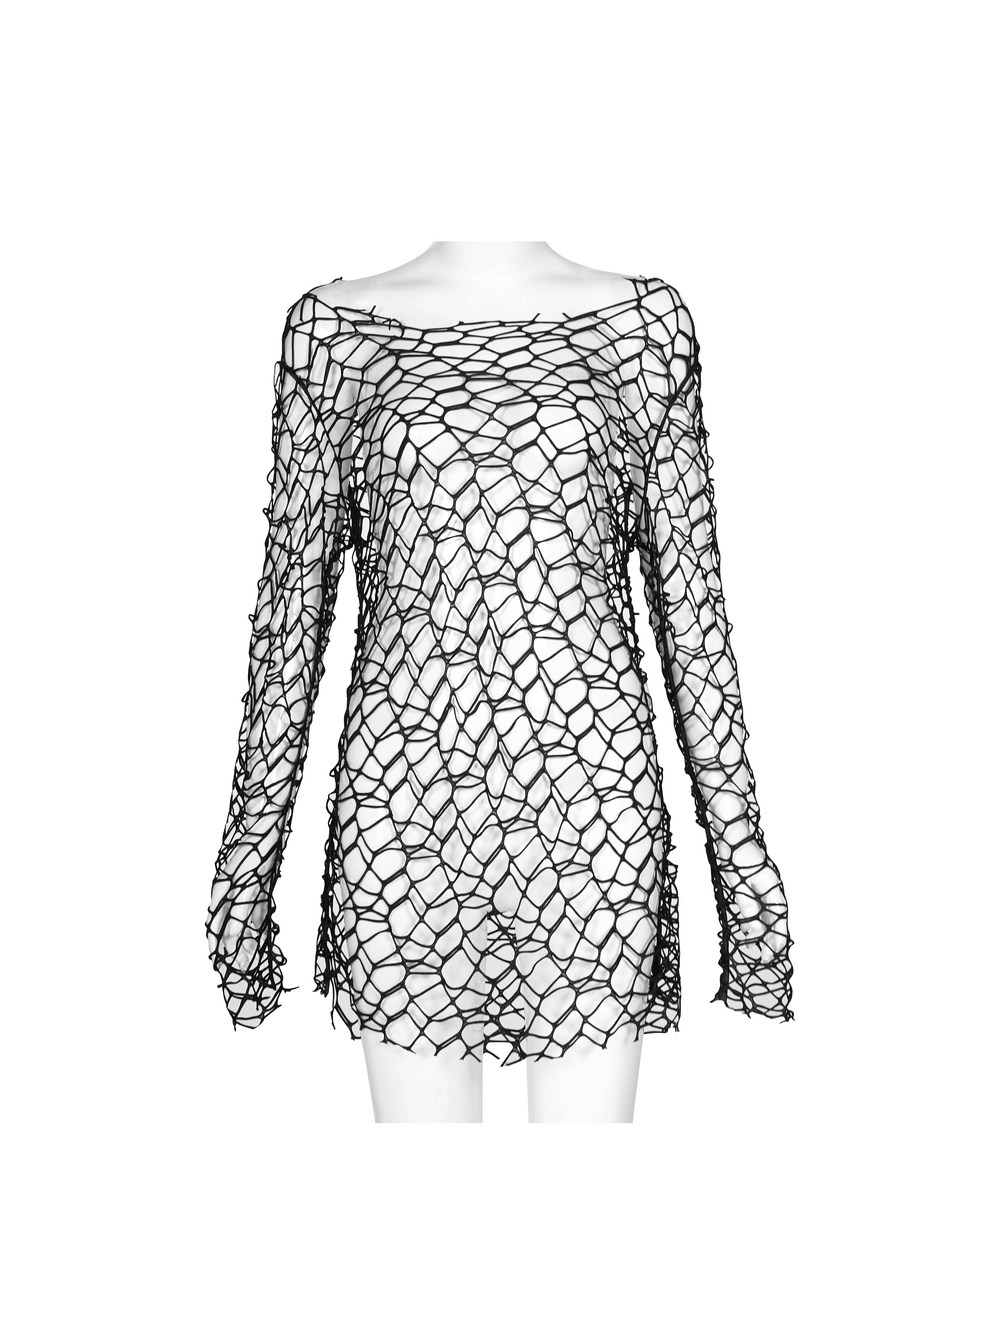 Stylish Edgy Sheer Oversize Knit Top for Punk Style